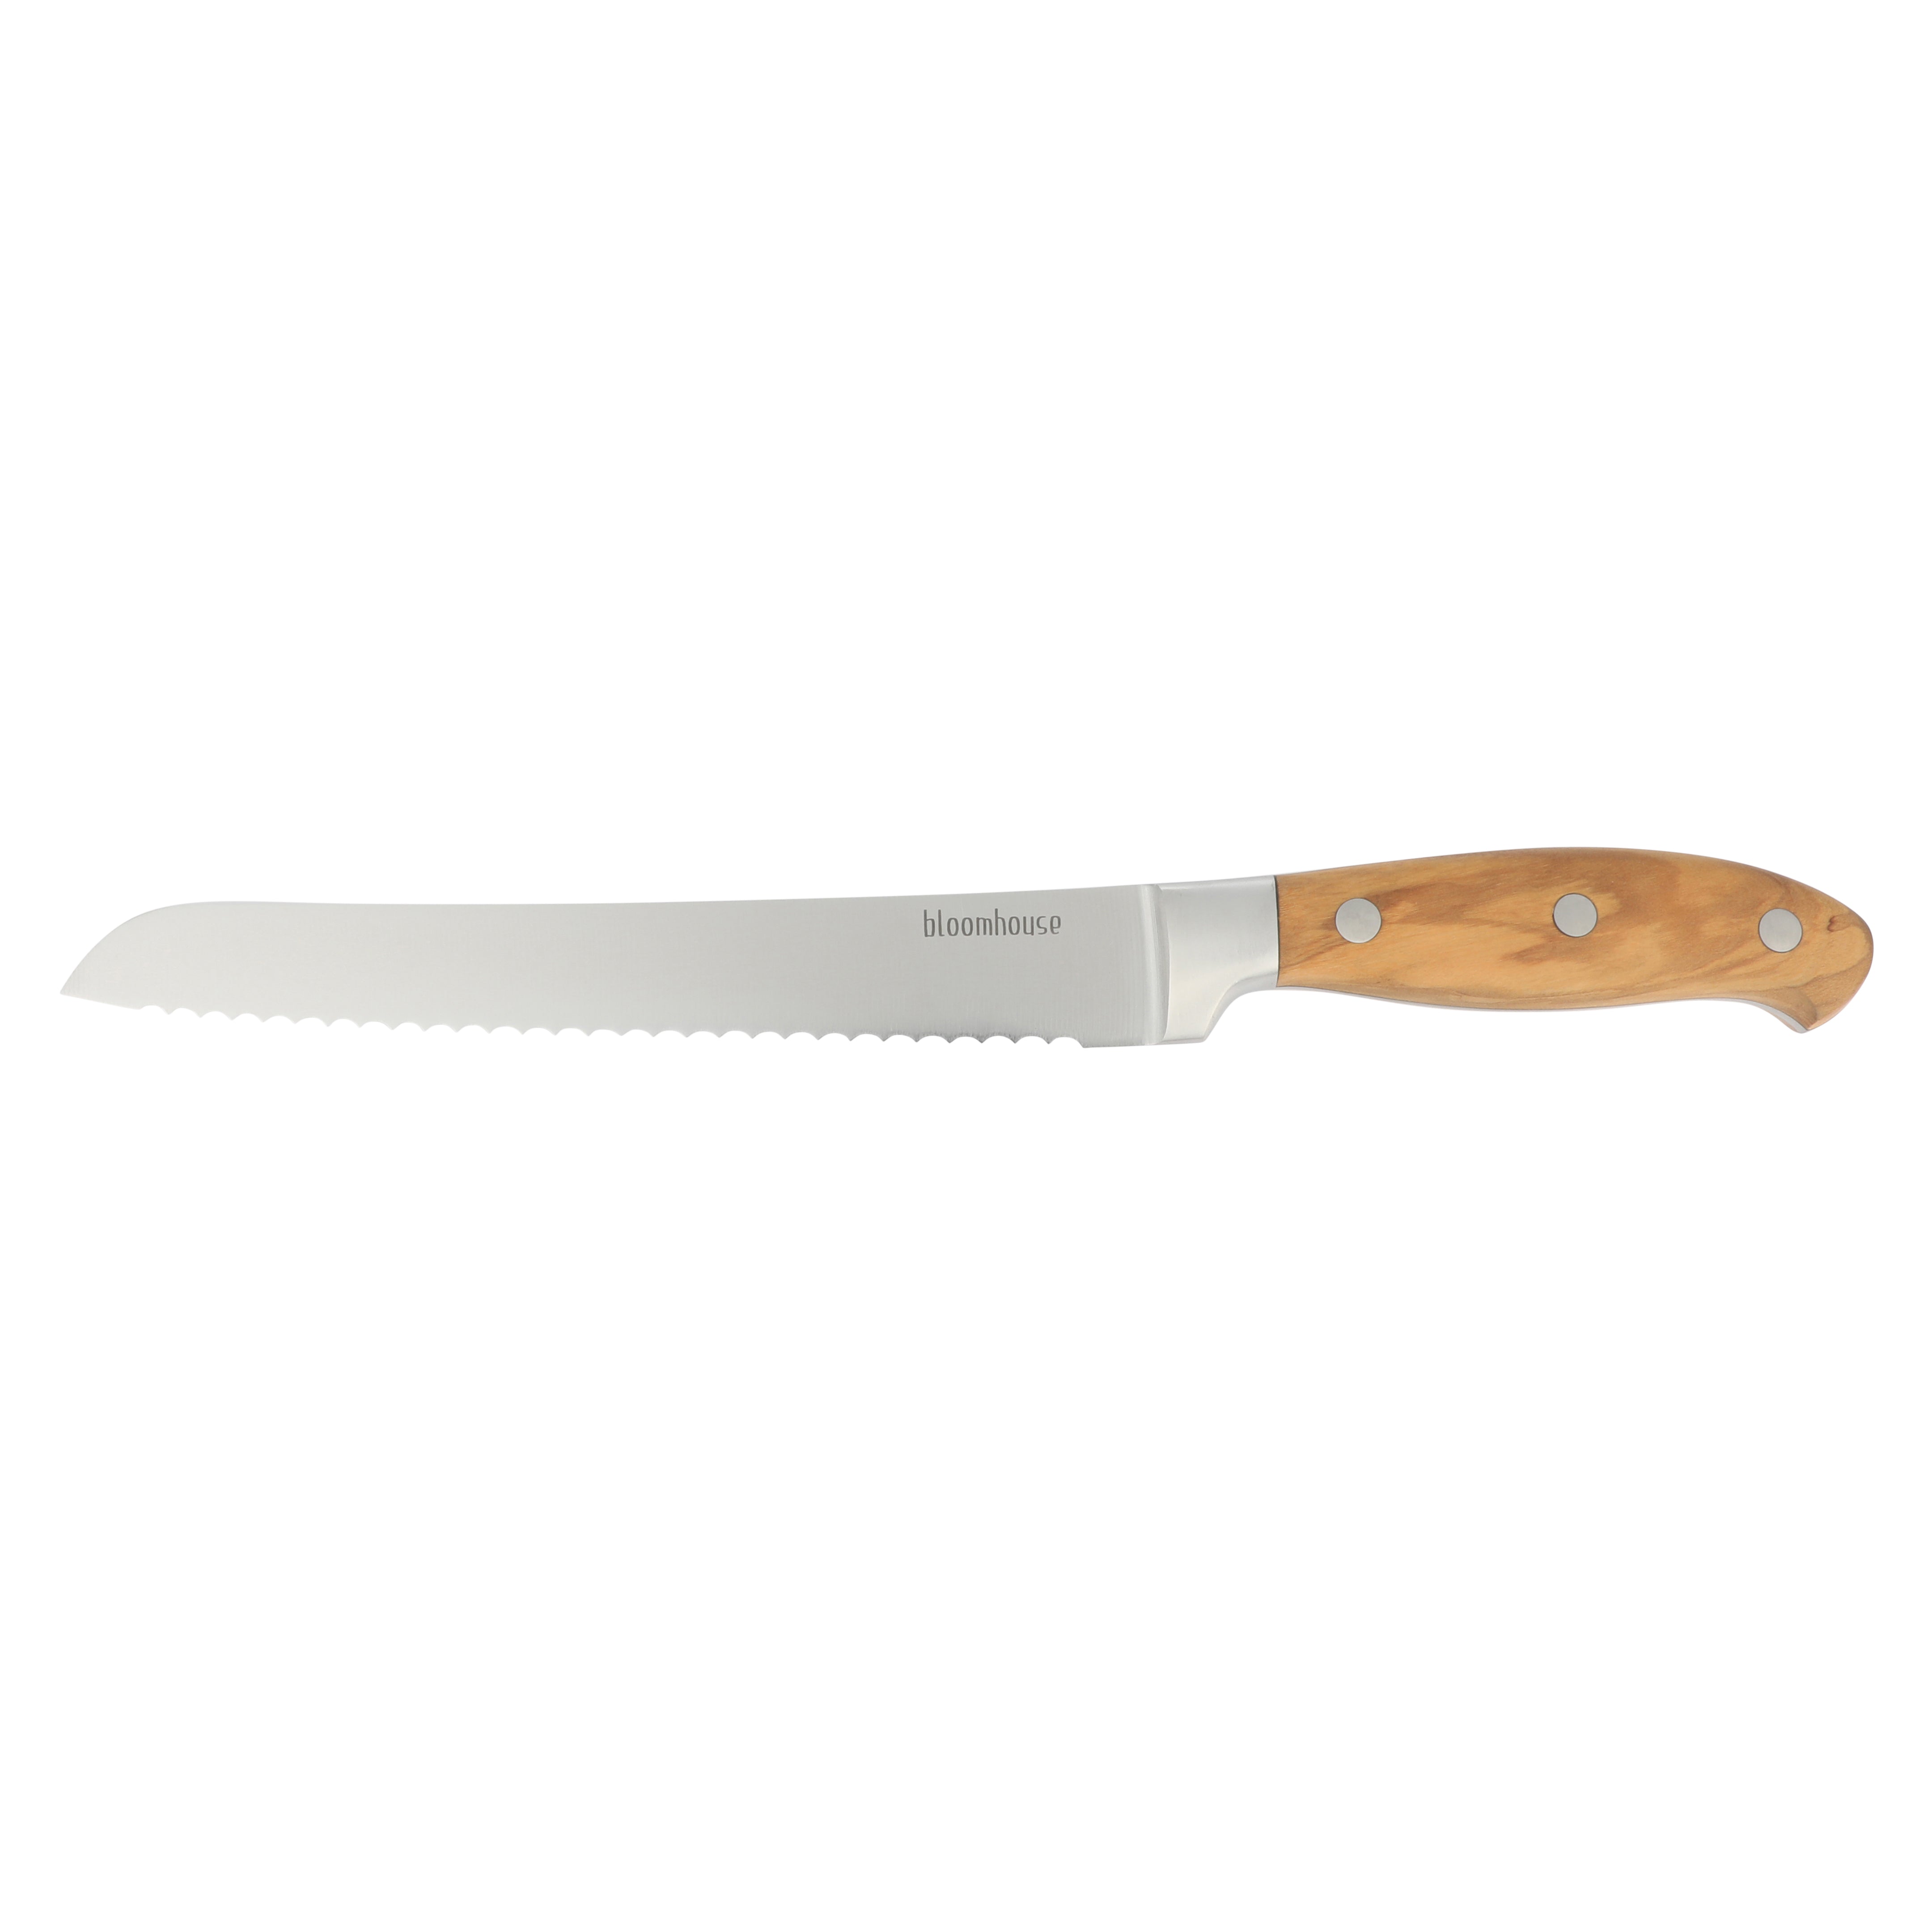 Bloomhouse 8 Inch German Steel Bread Knife w/ Olive Wood Forged Handle